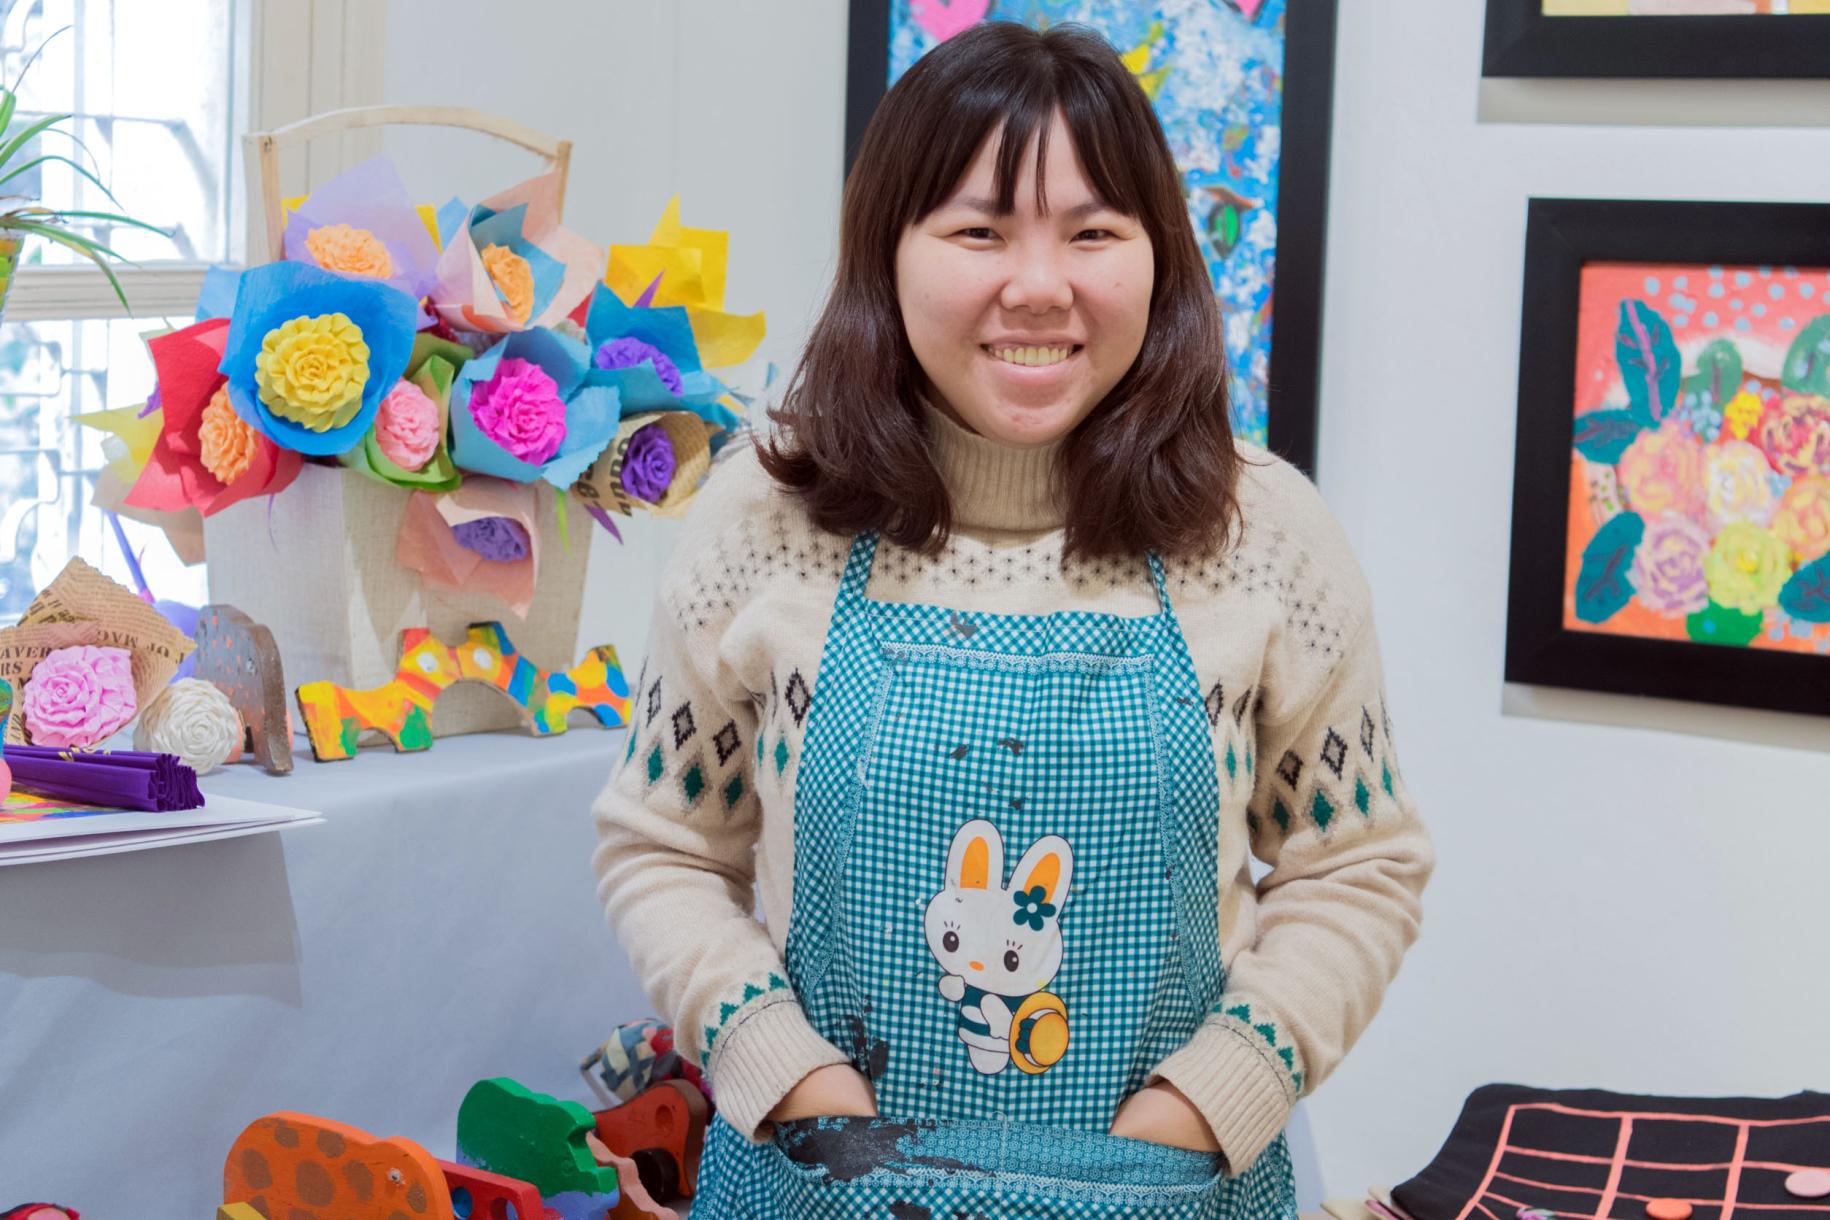 Tu Thanh Thuy smiles brightly at the camera as she stands with her hands in the pockets of her apron in front of colourful paper flowers and paintings.